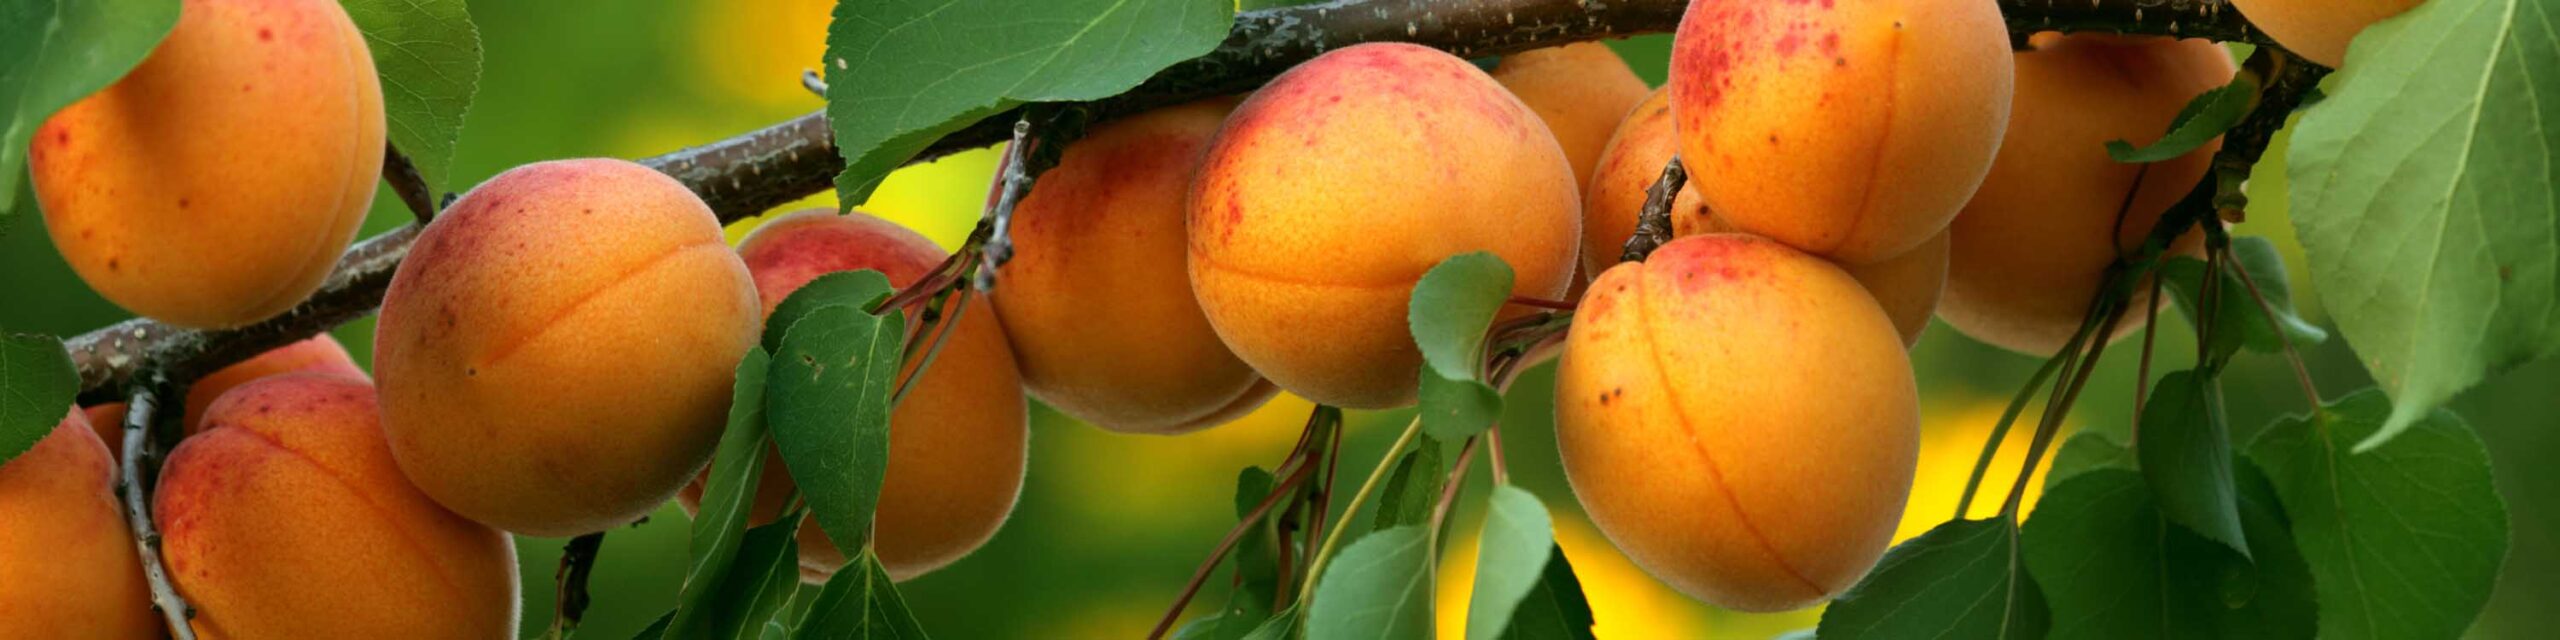 Apricot tree branched loaded with fruit.